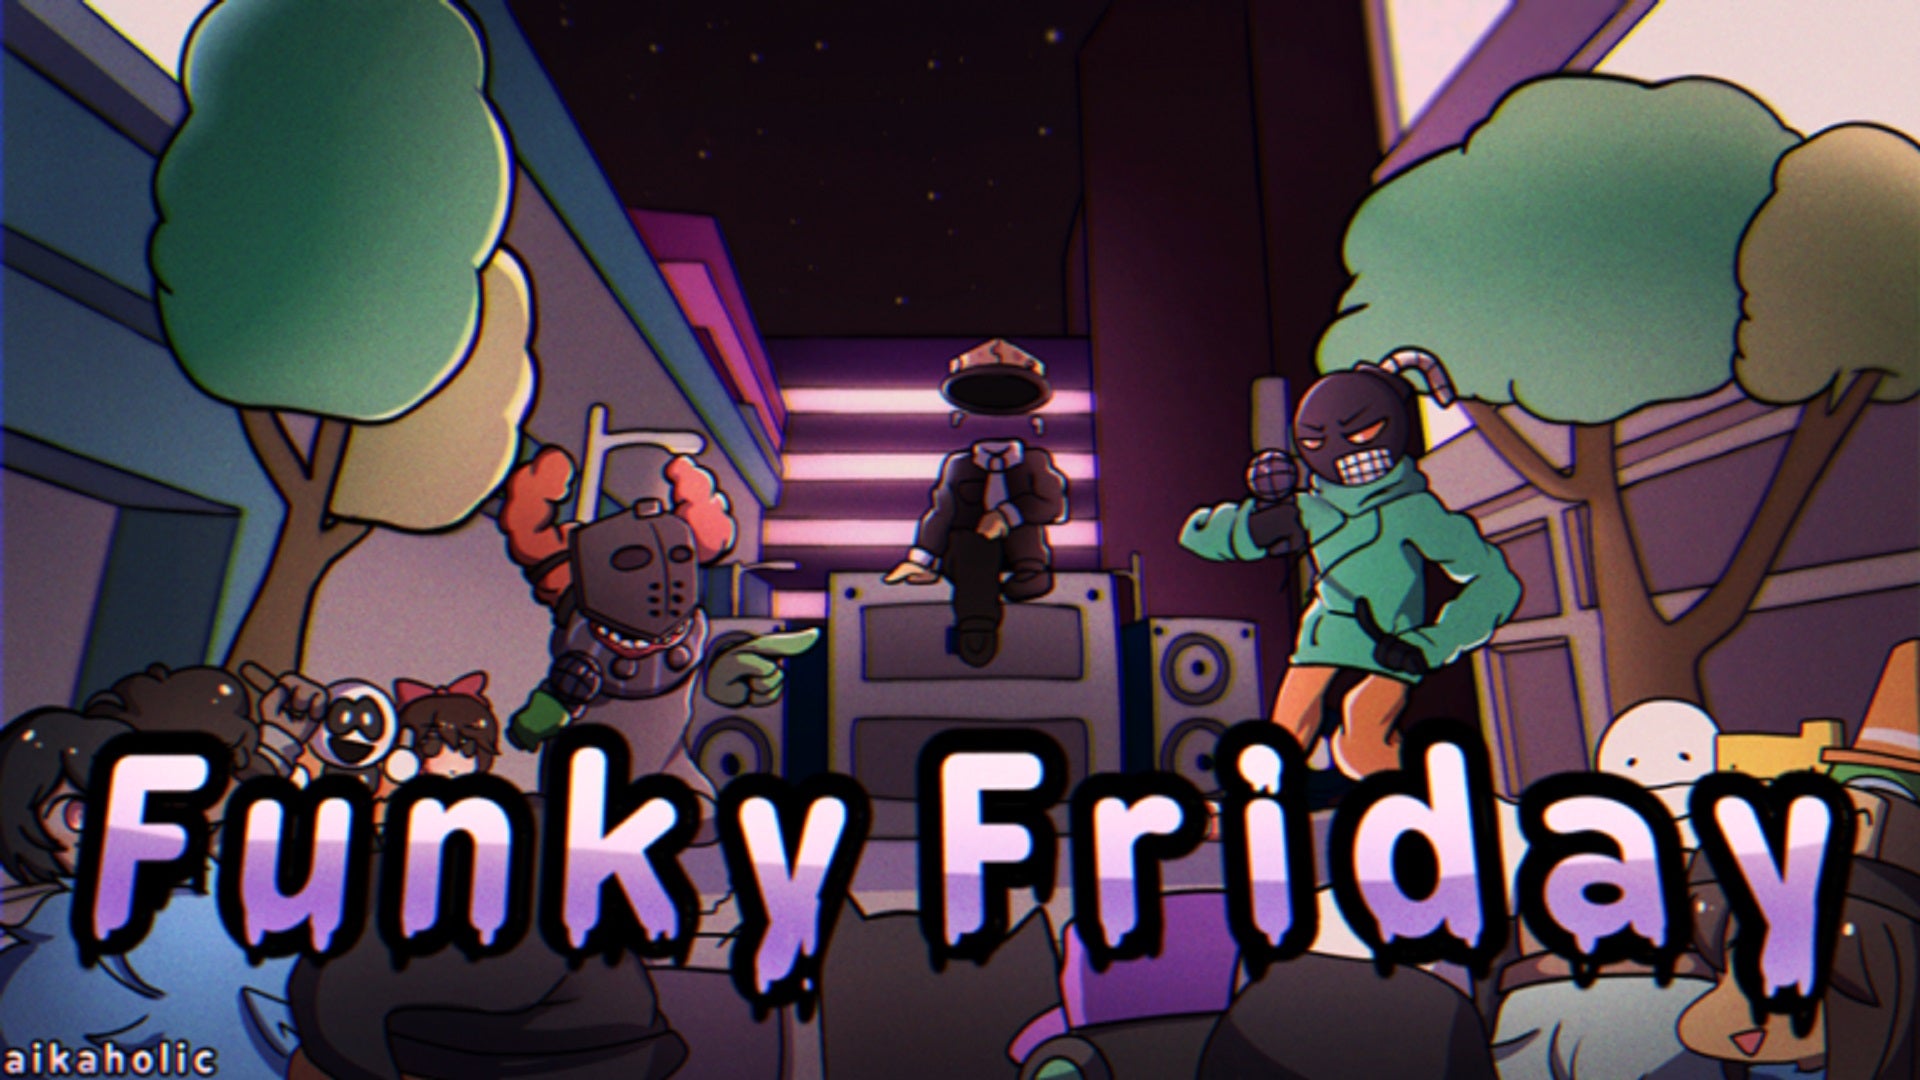 One of the Roblox banners for the Funky Friday experience, depicting a rap battle between a fantasy knight, an invisible person, and an anthropomorphic cartoon bomb.